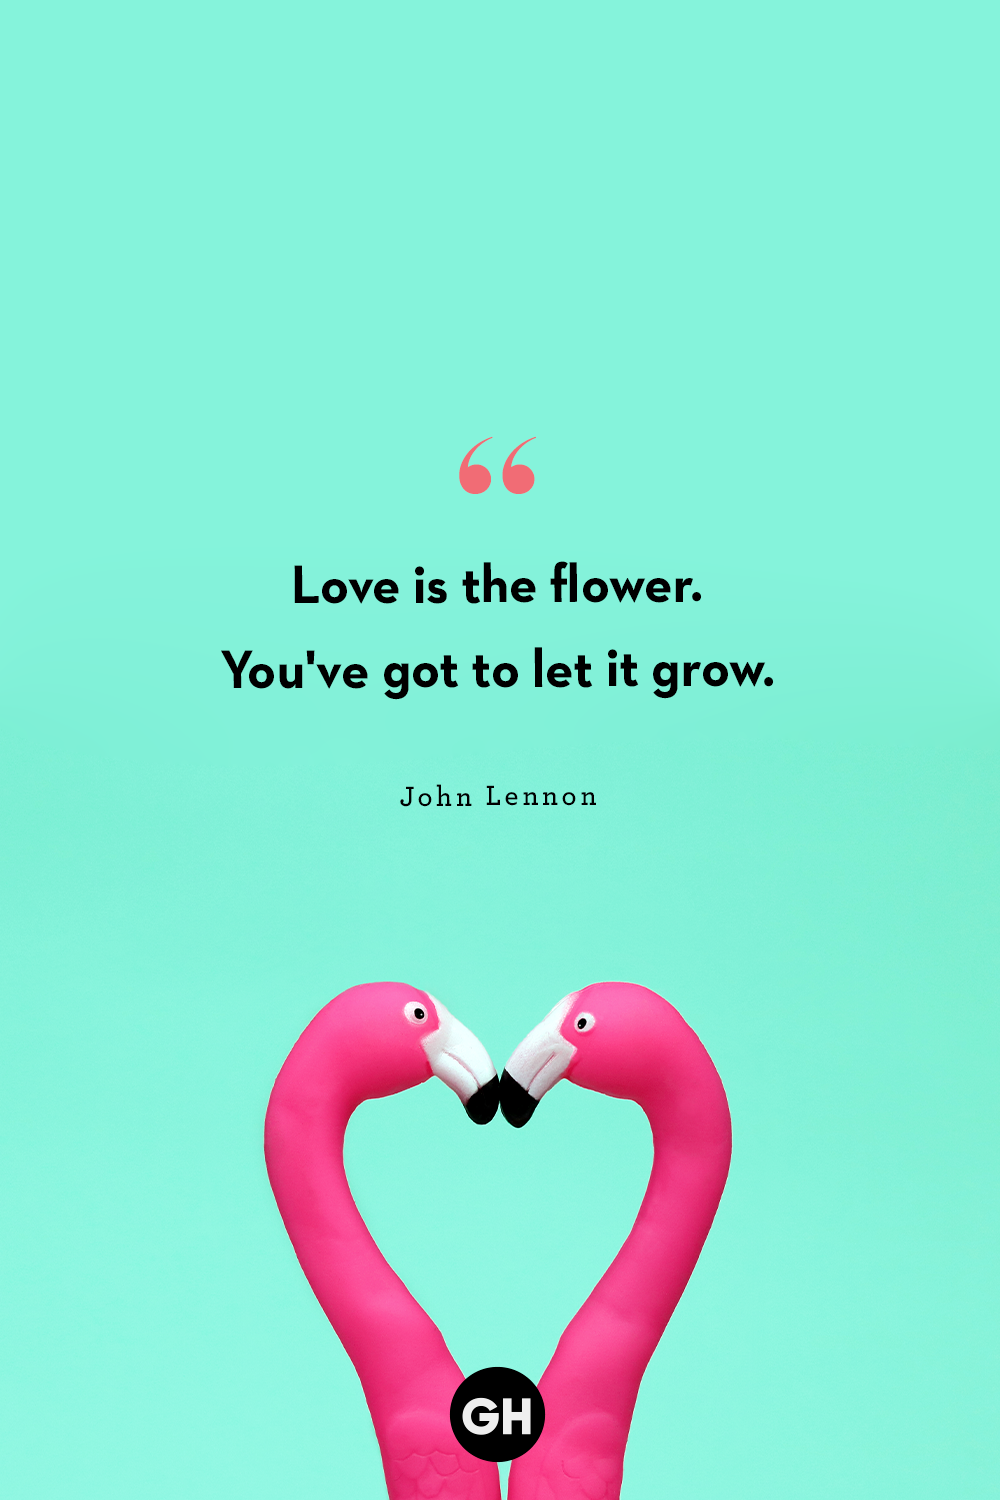 awesome love quote backgrounds